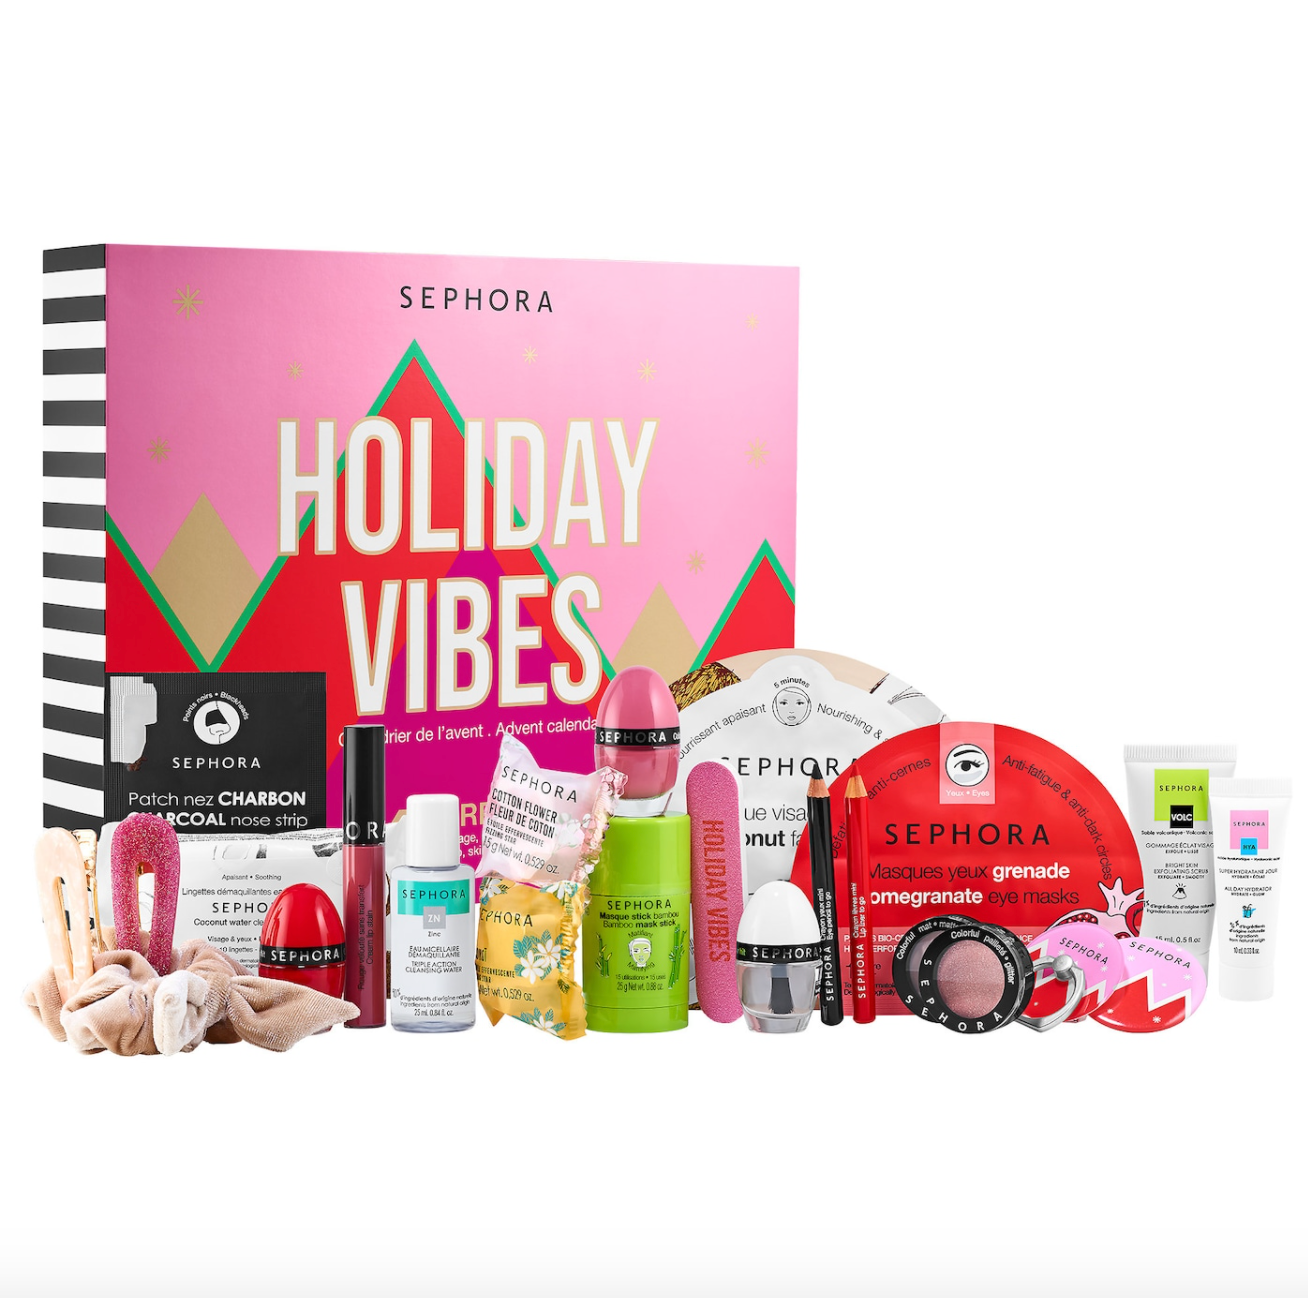 sephora-collection-holiday-vibes-advent-calendar